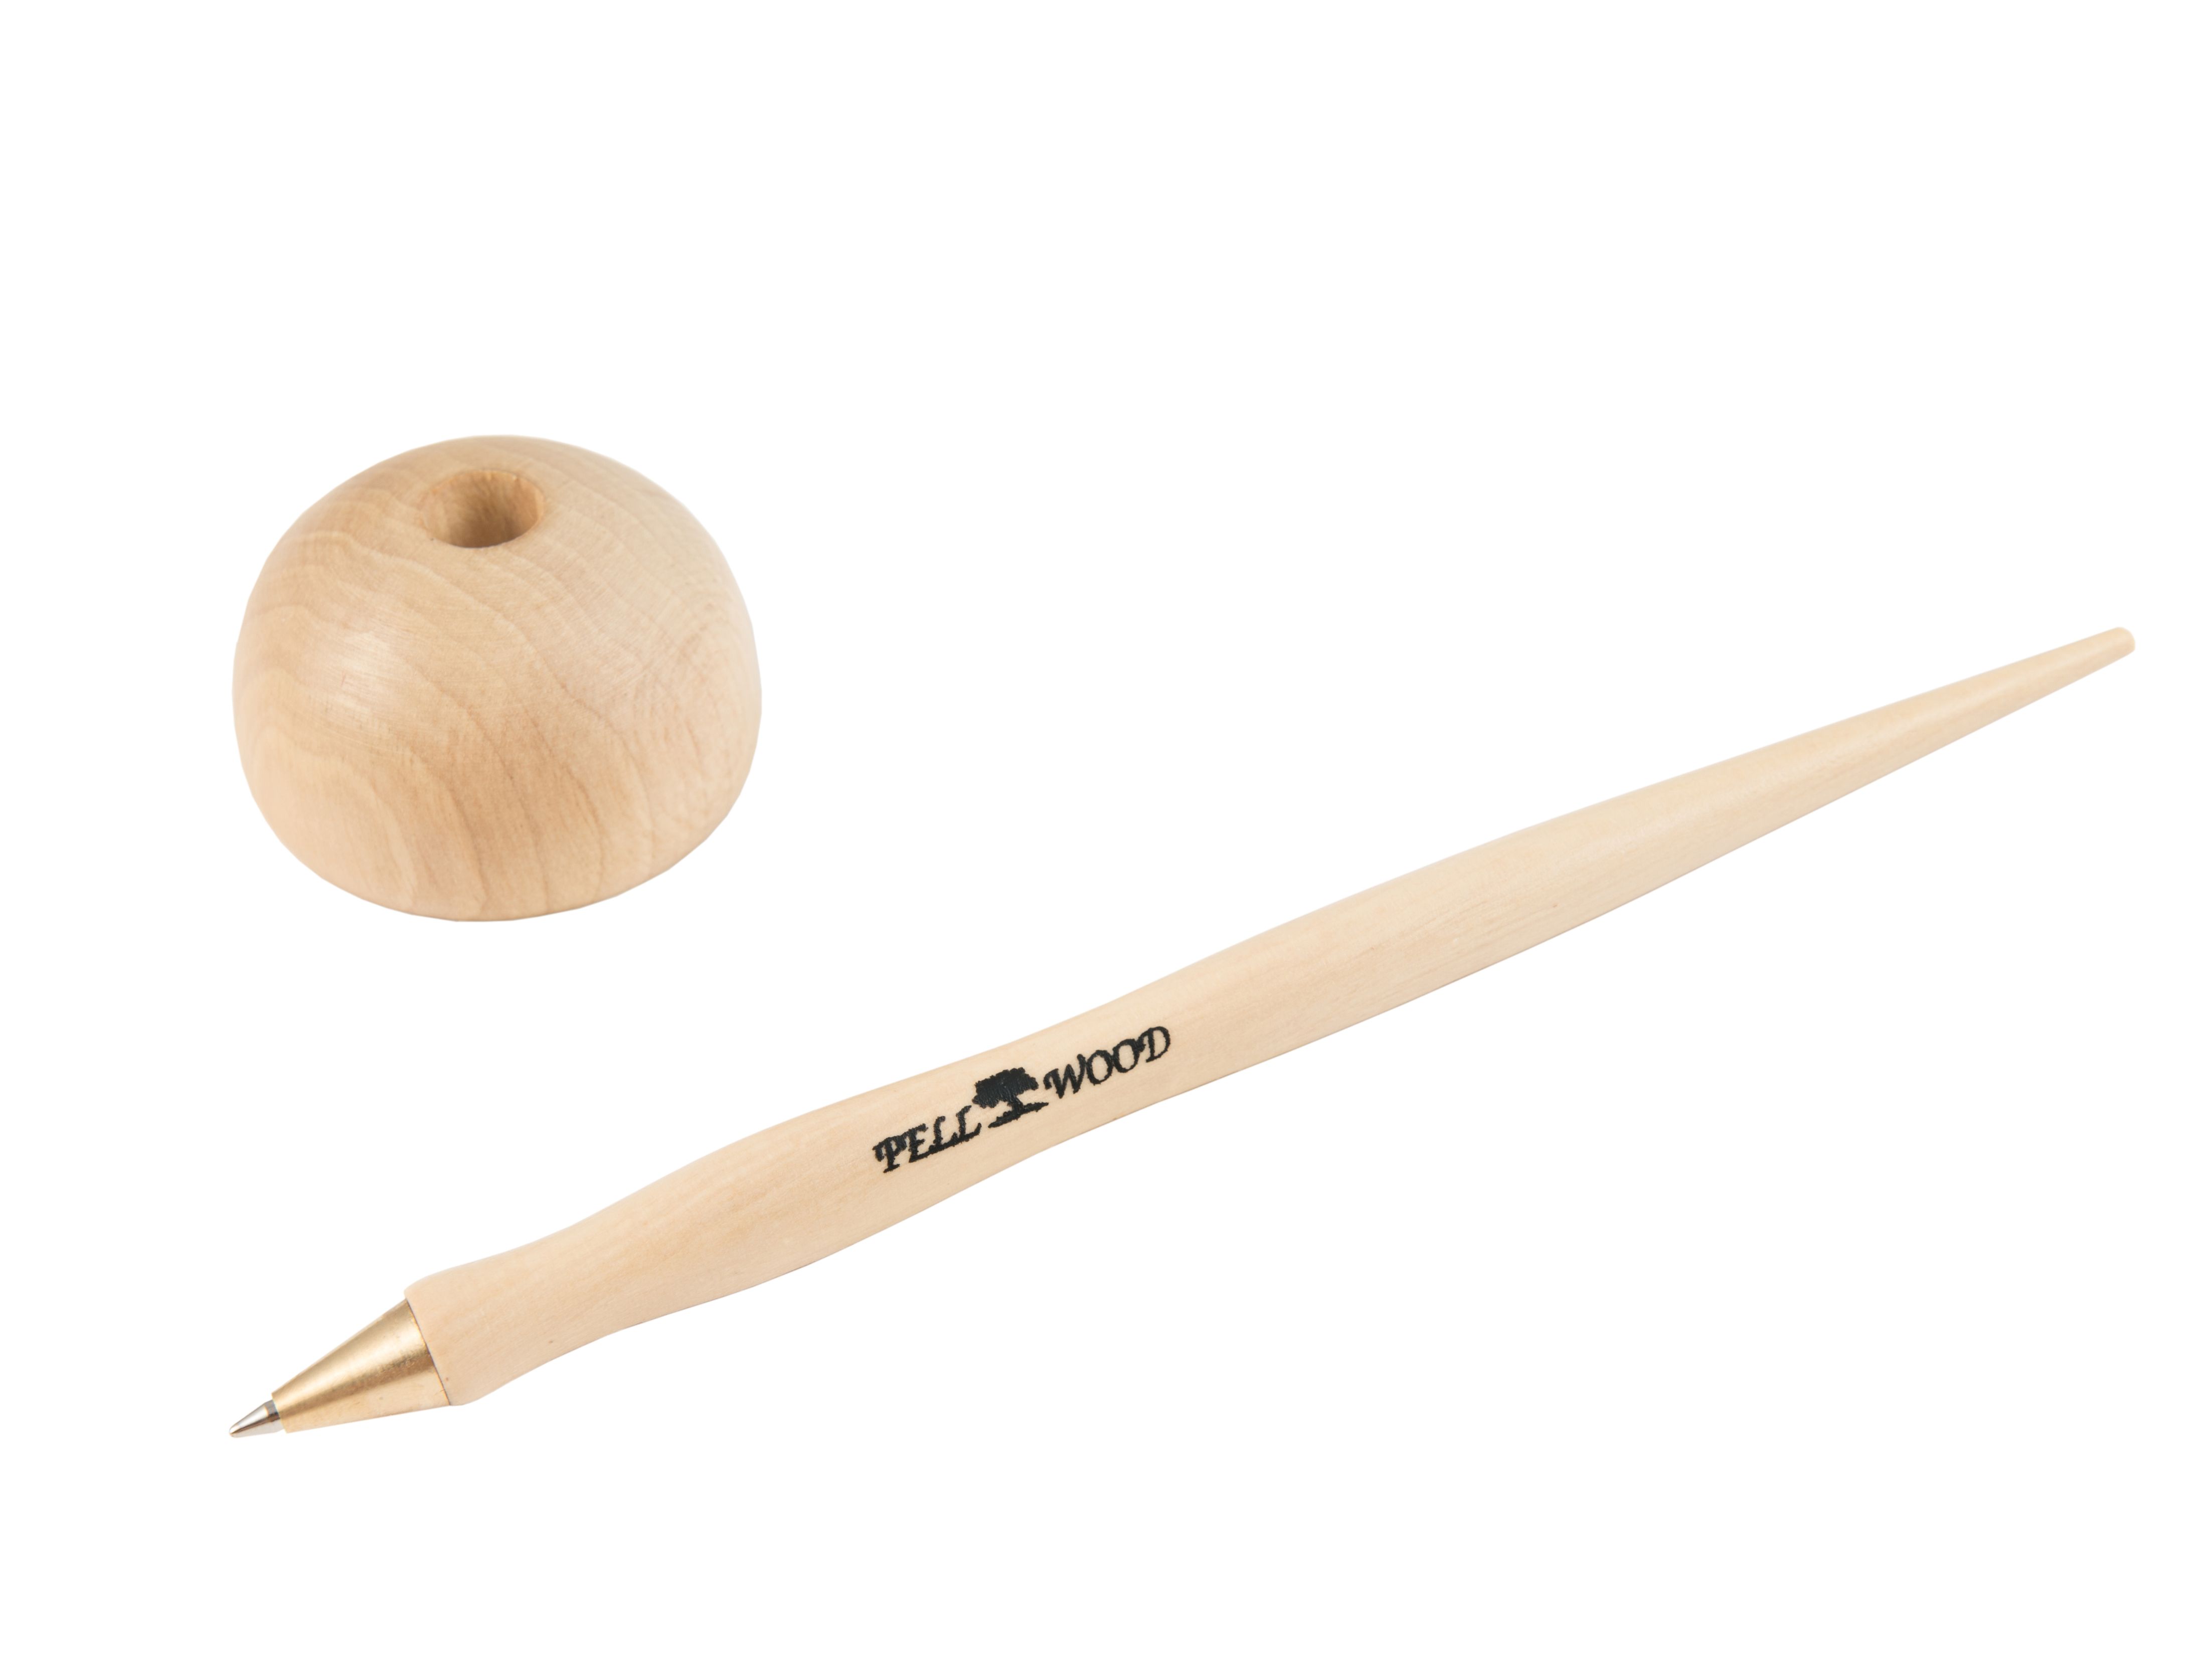 The natural wooden ballpoint pen Pellwood with stand